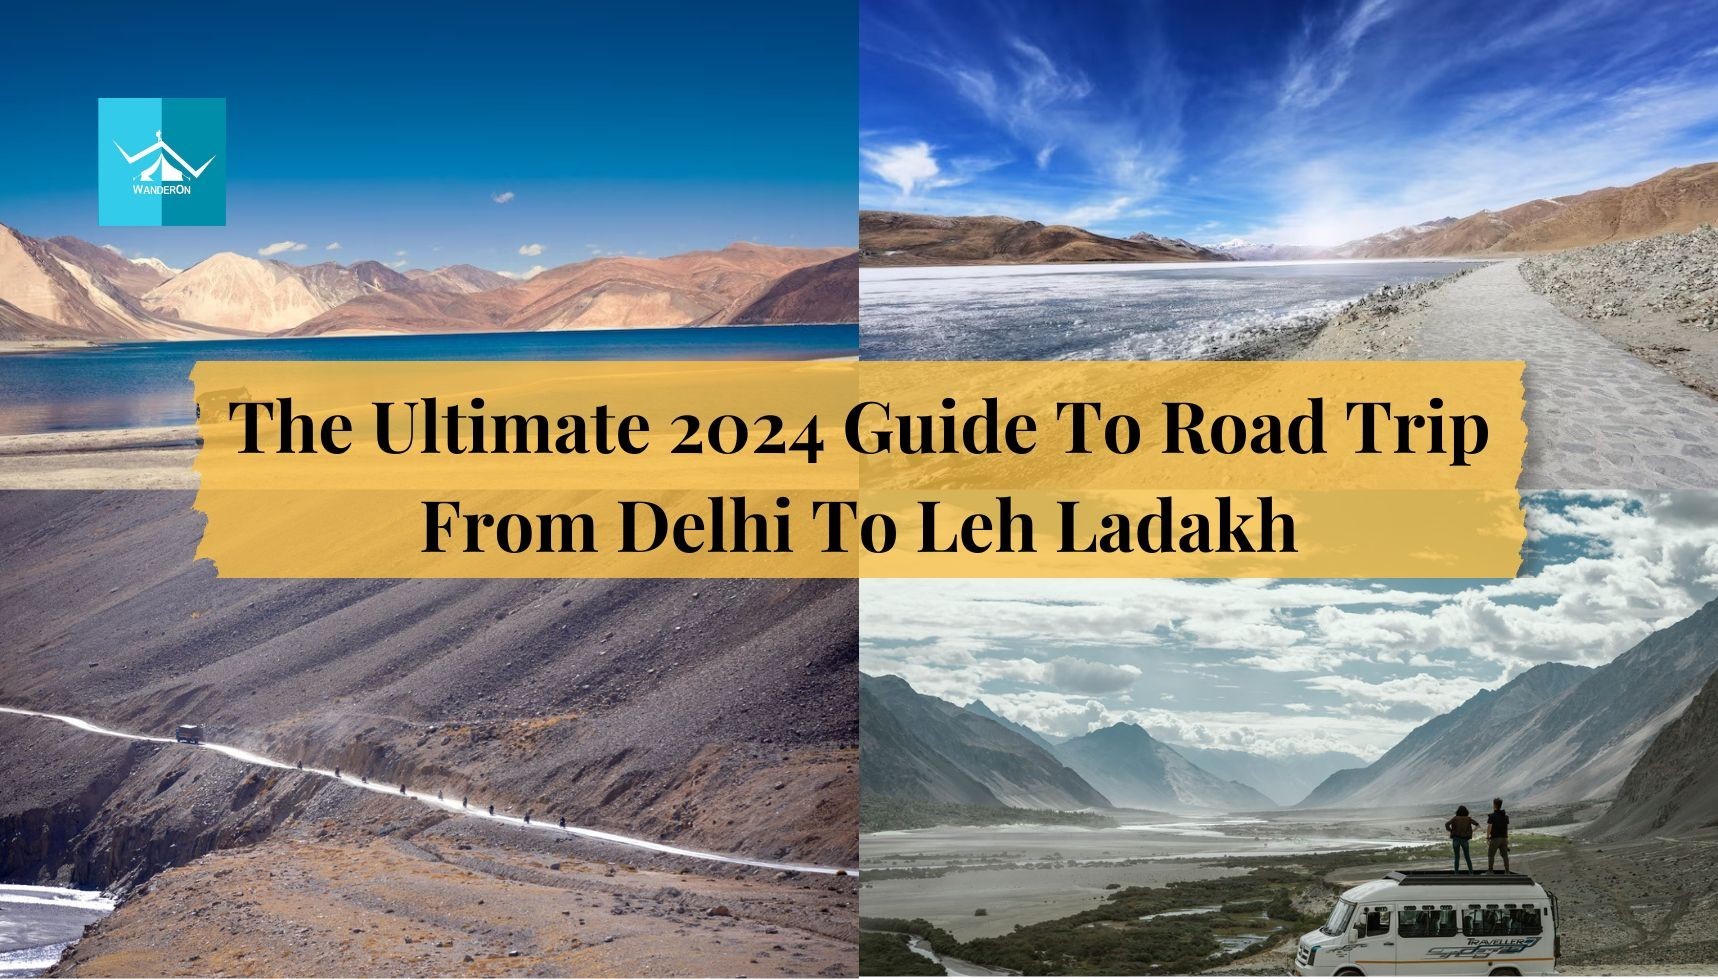 Journey to the Top of the World: The Ultimate 2024 Guide to Road Trip from Delhi to Leh Ladakh